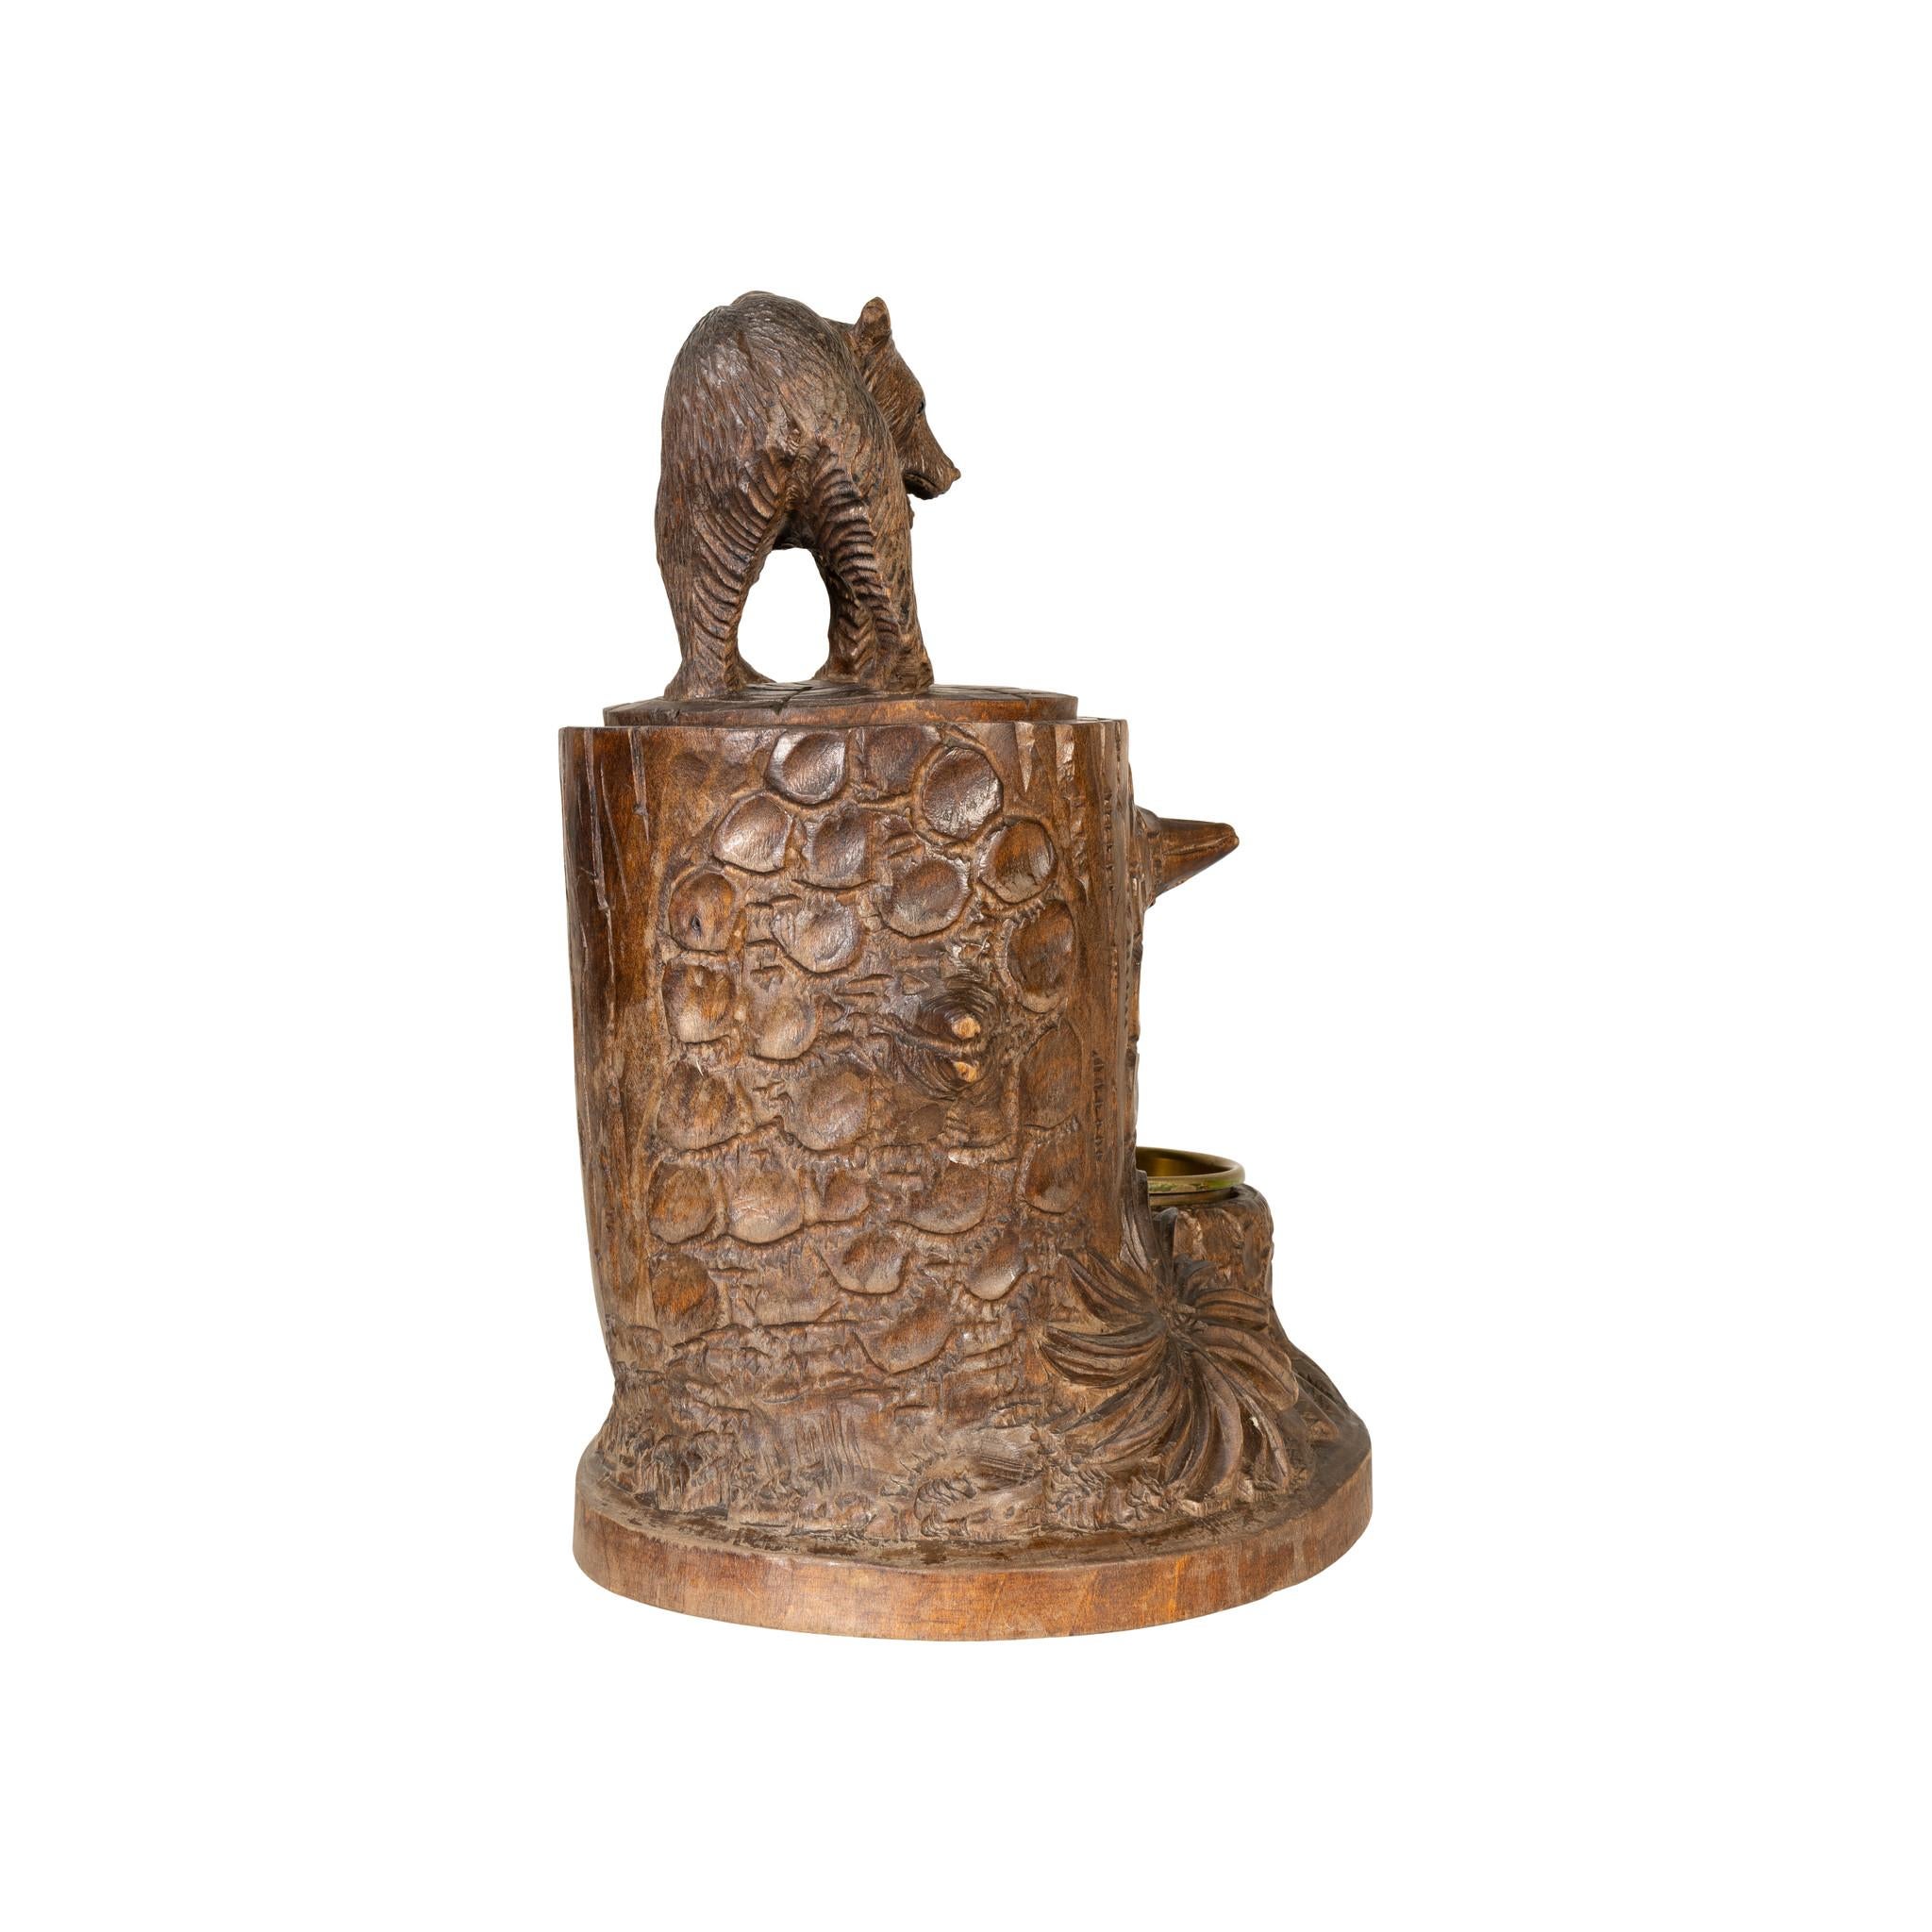 Black Forest humidor. Tree trunk style with standing bear on top. Brass ashtray and match holder.

The idea behind the marvelous success of Brienz wood carving was quite simple. After a disastrous famine in 1816 in the Brienz area people were forced